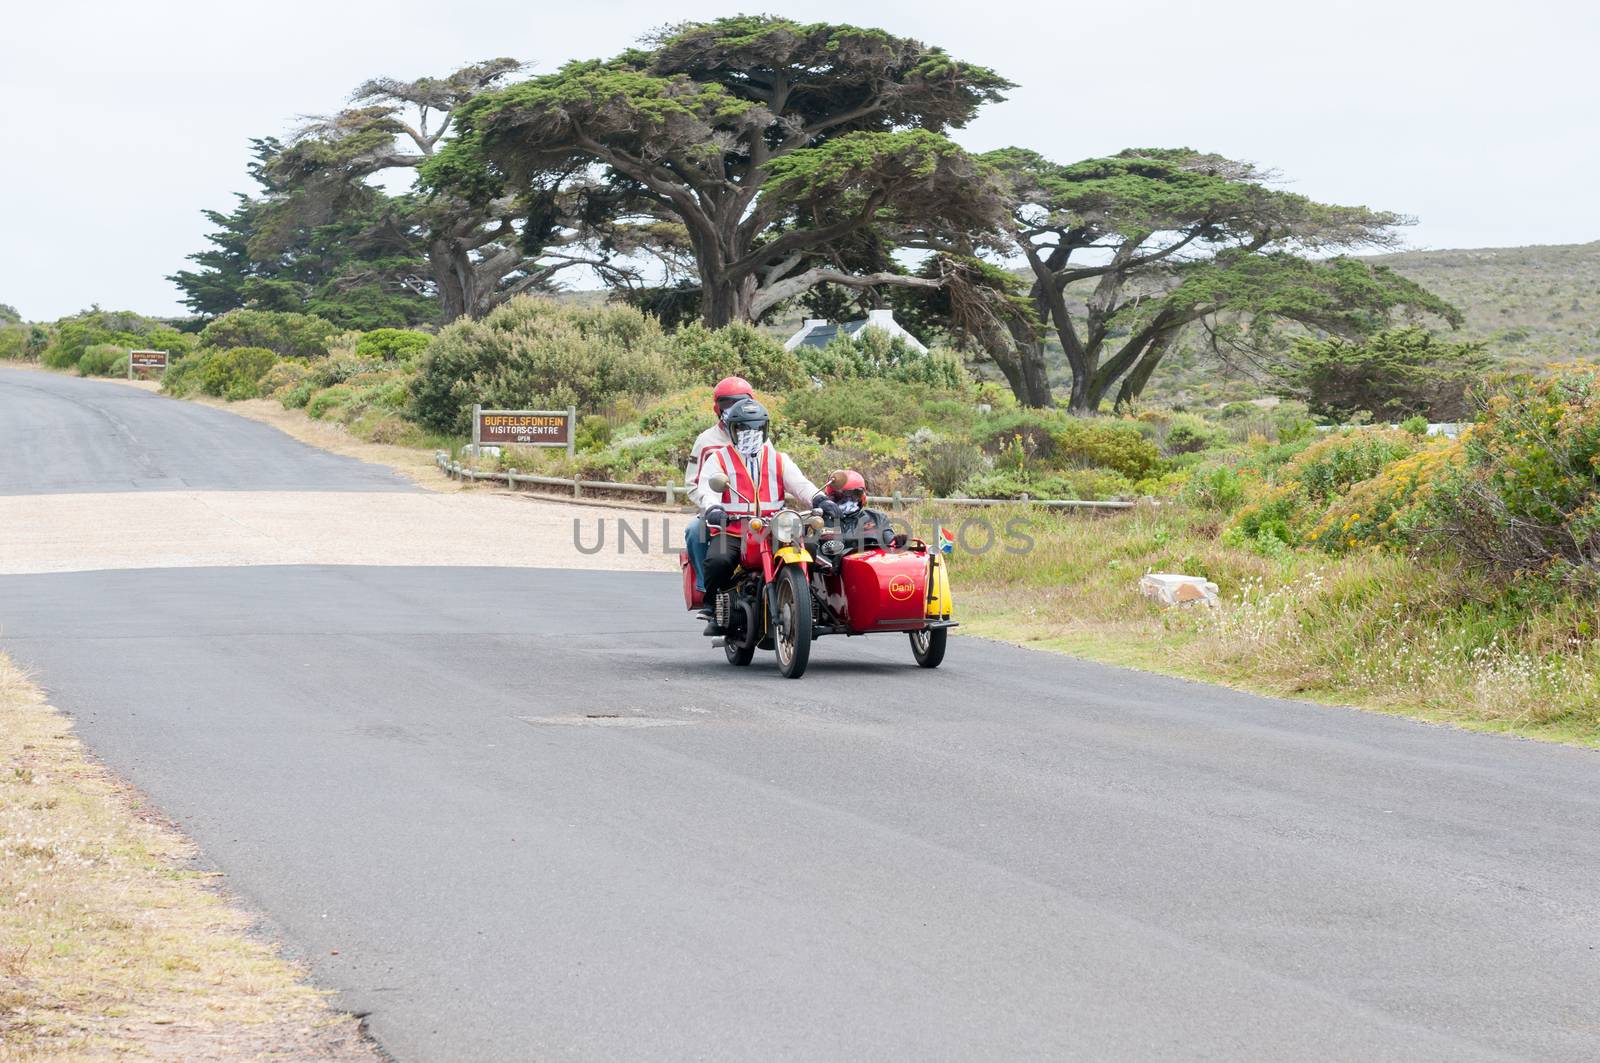 CAPE TOWN, SOUTH AFRICA - DECEMBER 12, 2014:  Unknown motorcyclists visiting the Cape Point section of the Table Mountain National Park.